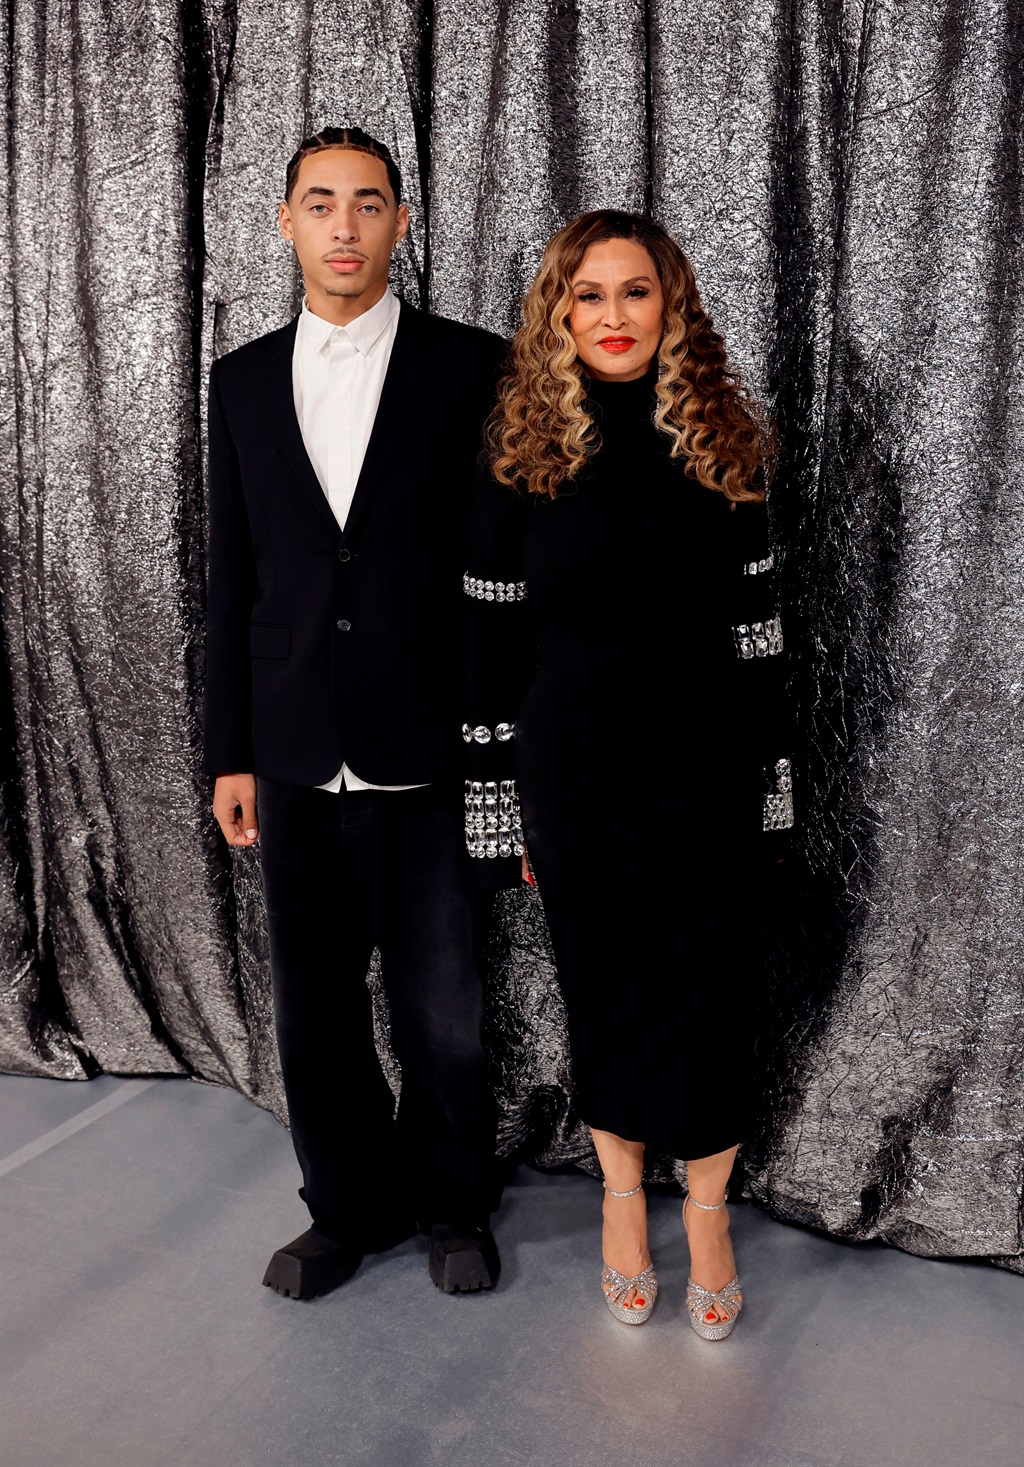 Julez Smith and Ms. Tina Knowles attend the World 